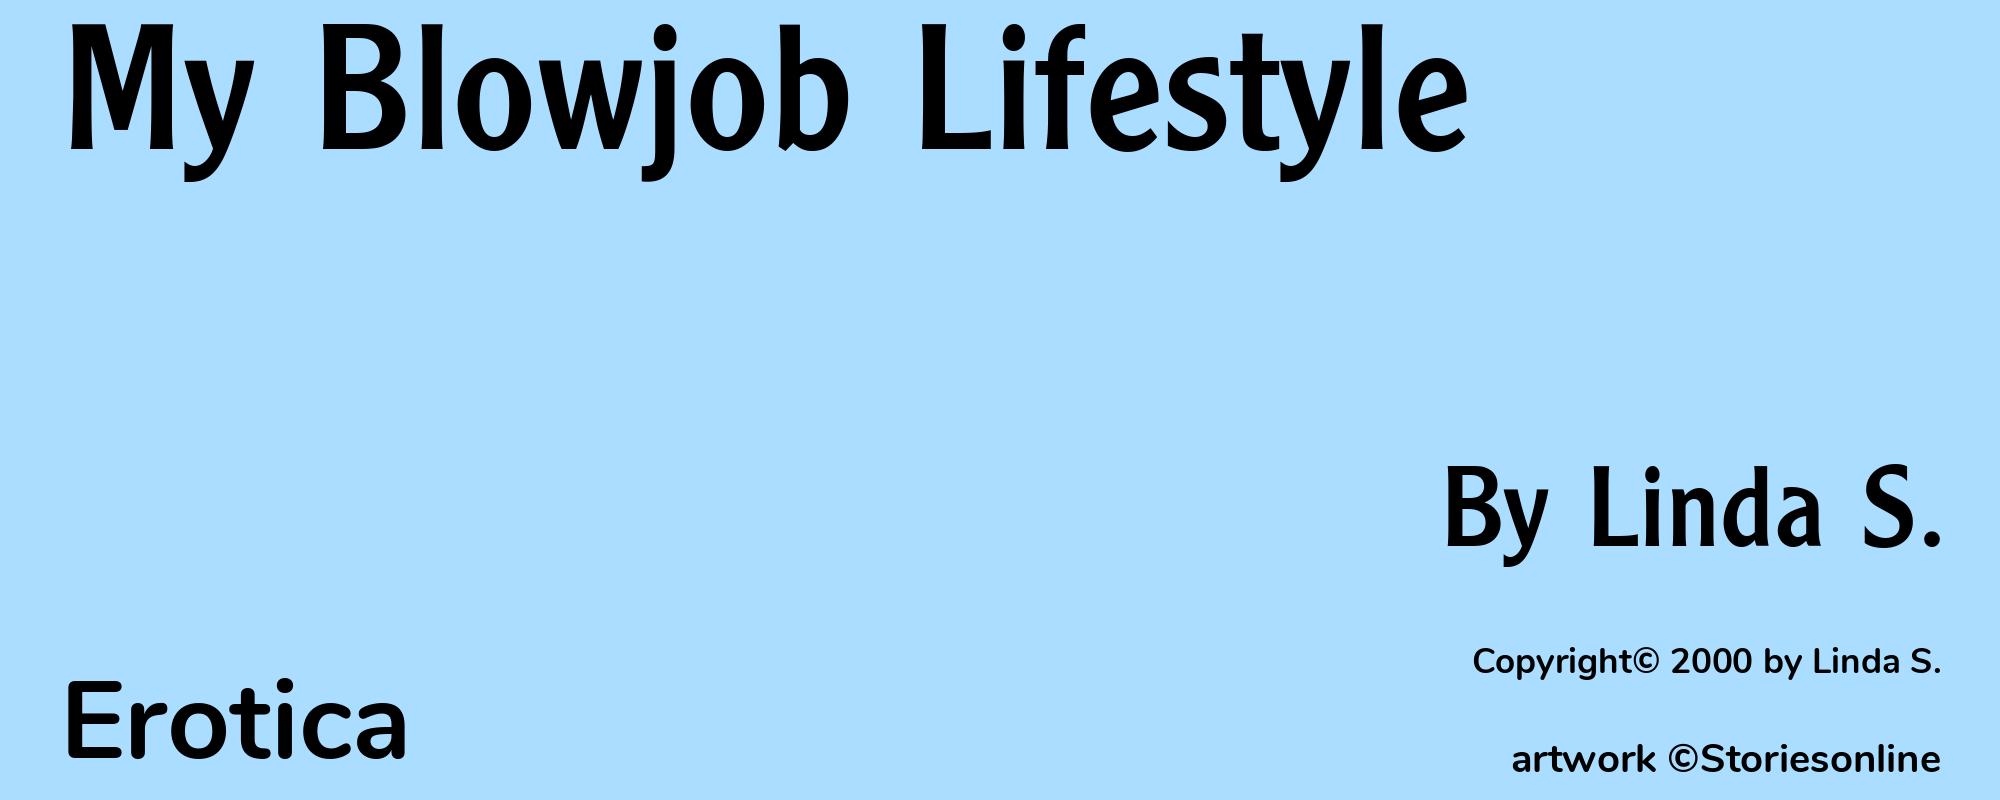 My Blowjob Lifestyle - Cover